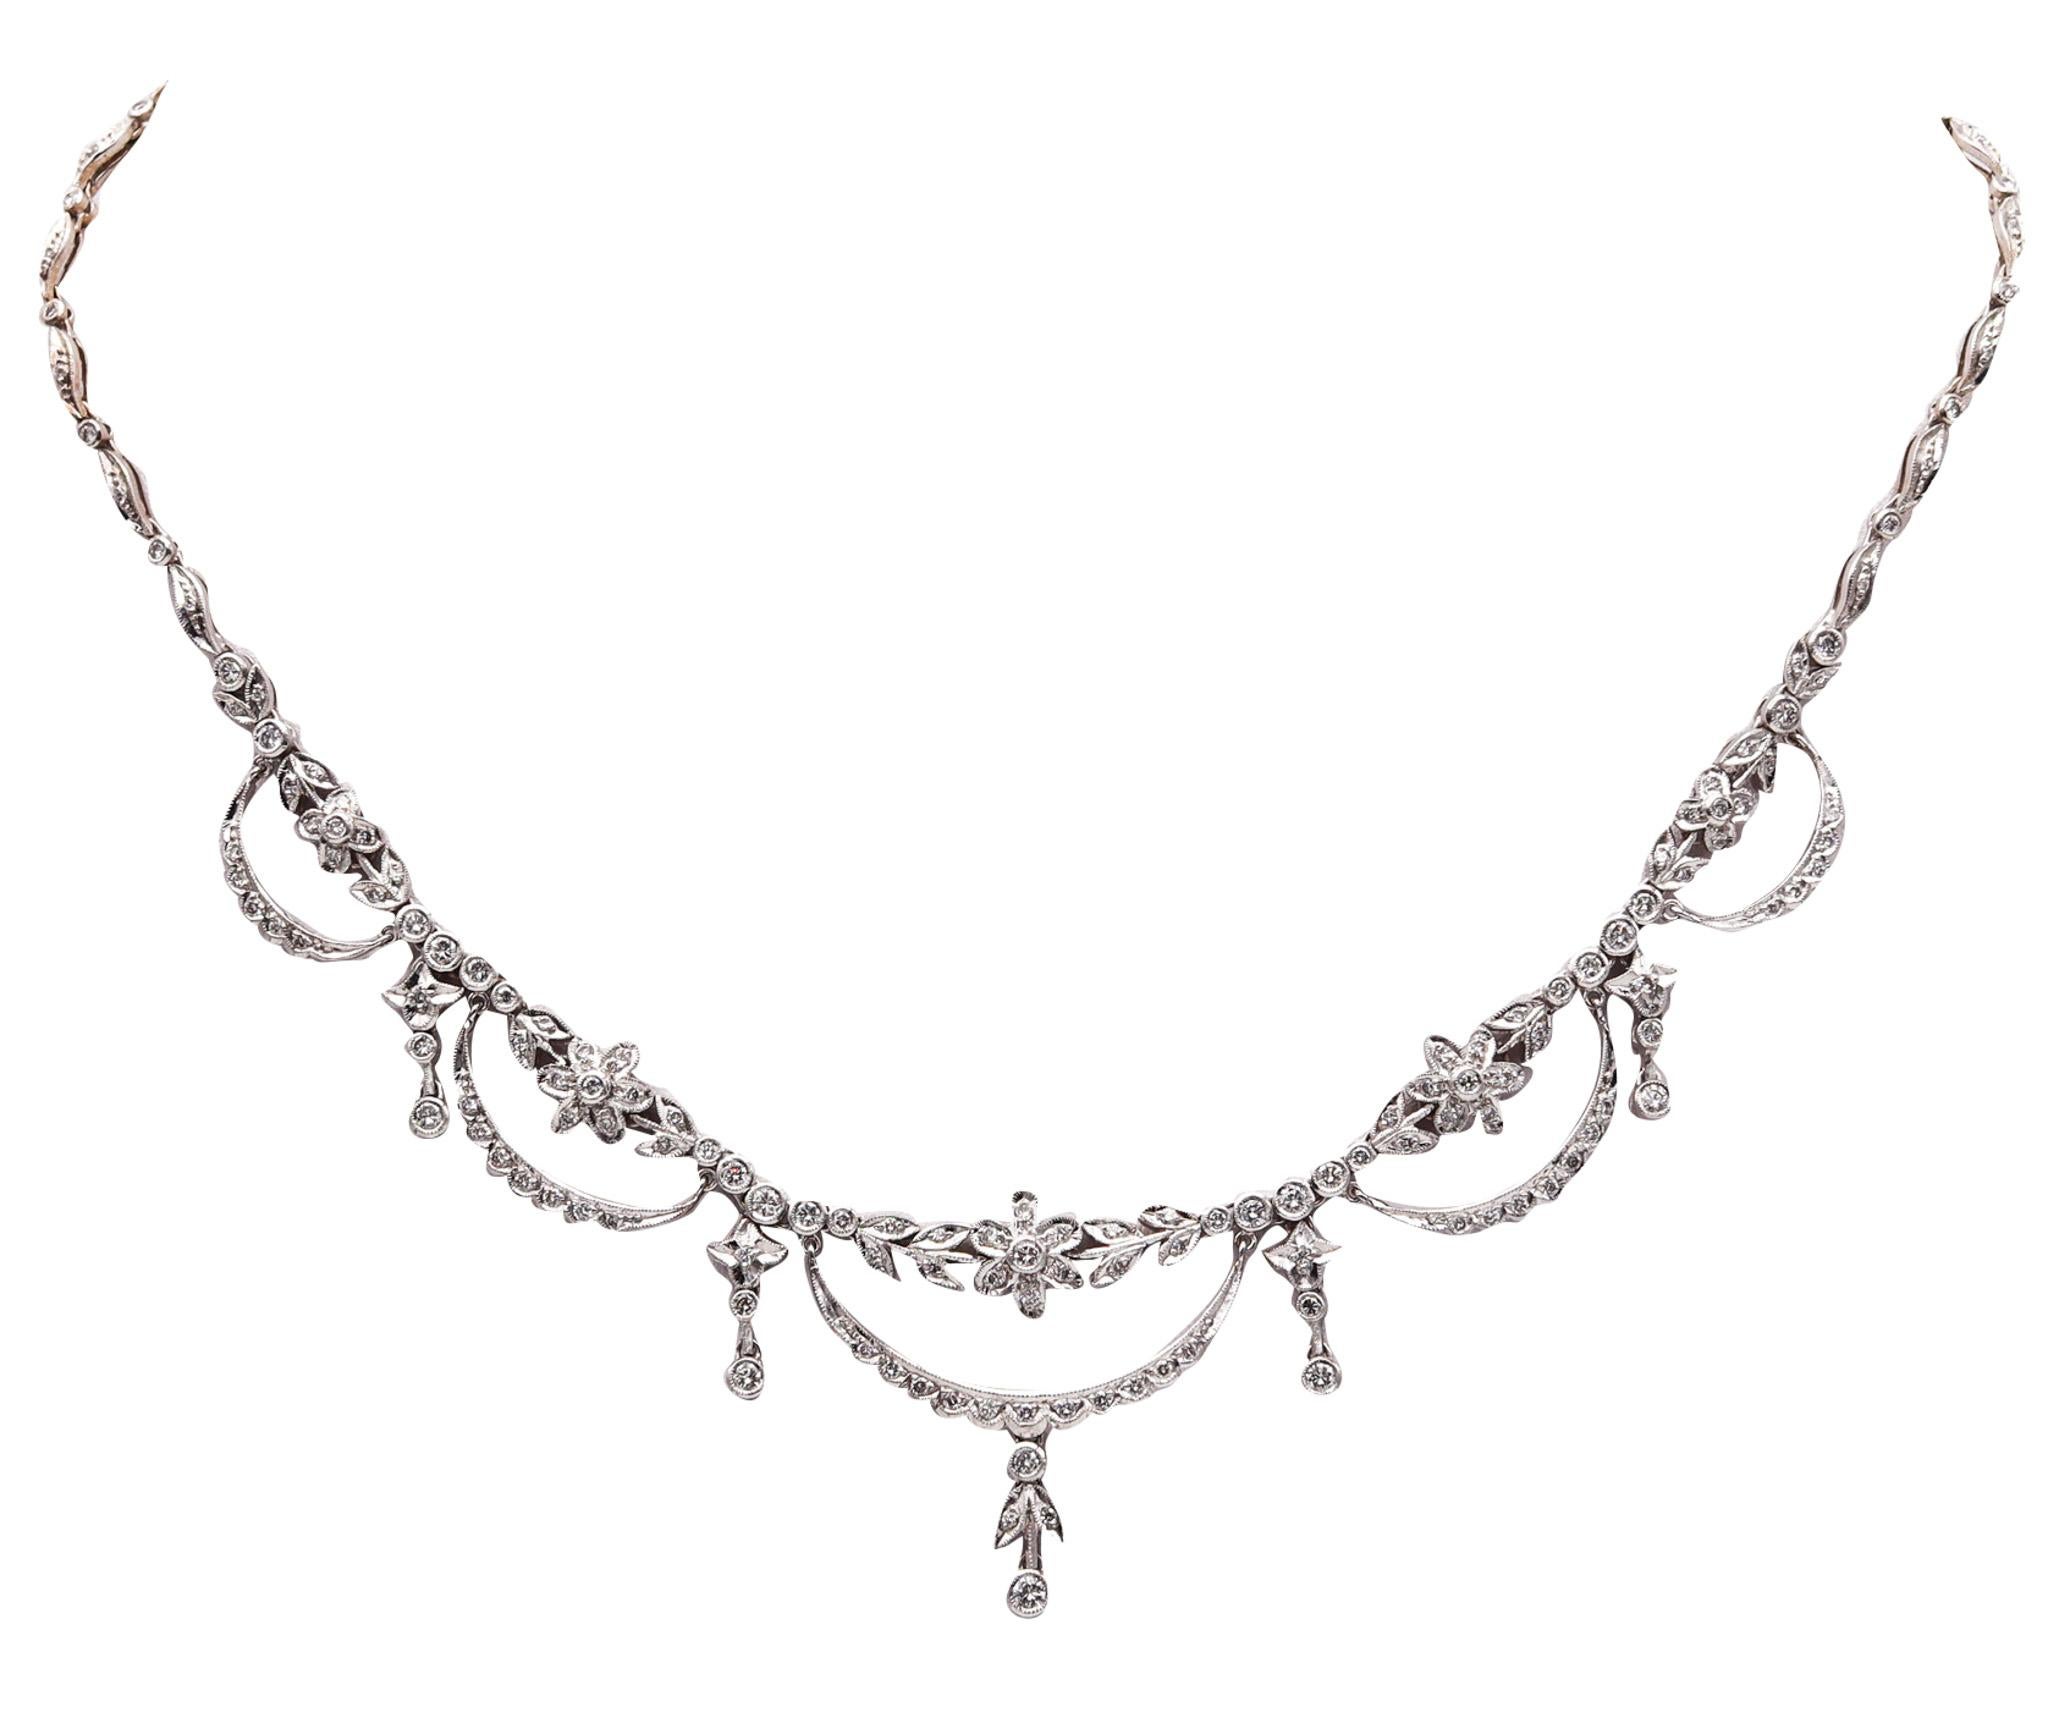 Edwardian garlands necklace with diamonds.

Beautiful piece of classic jewelry, created during the late Edwardian period back in the 1910. This beautiful necklace as been exceptionally crafted in solid white gold of 18 karats with intricate